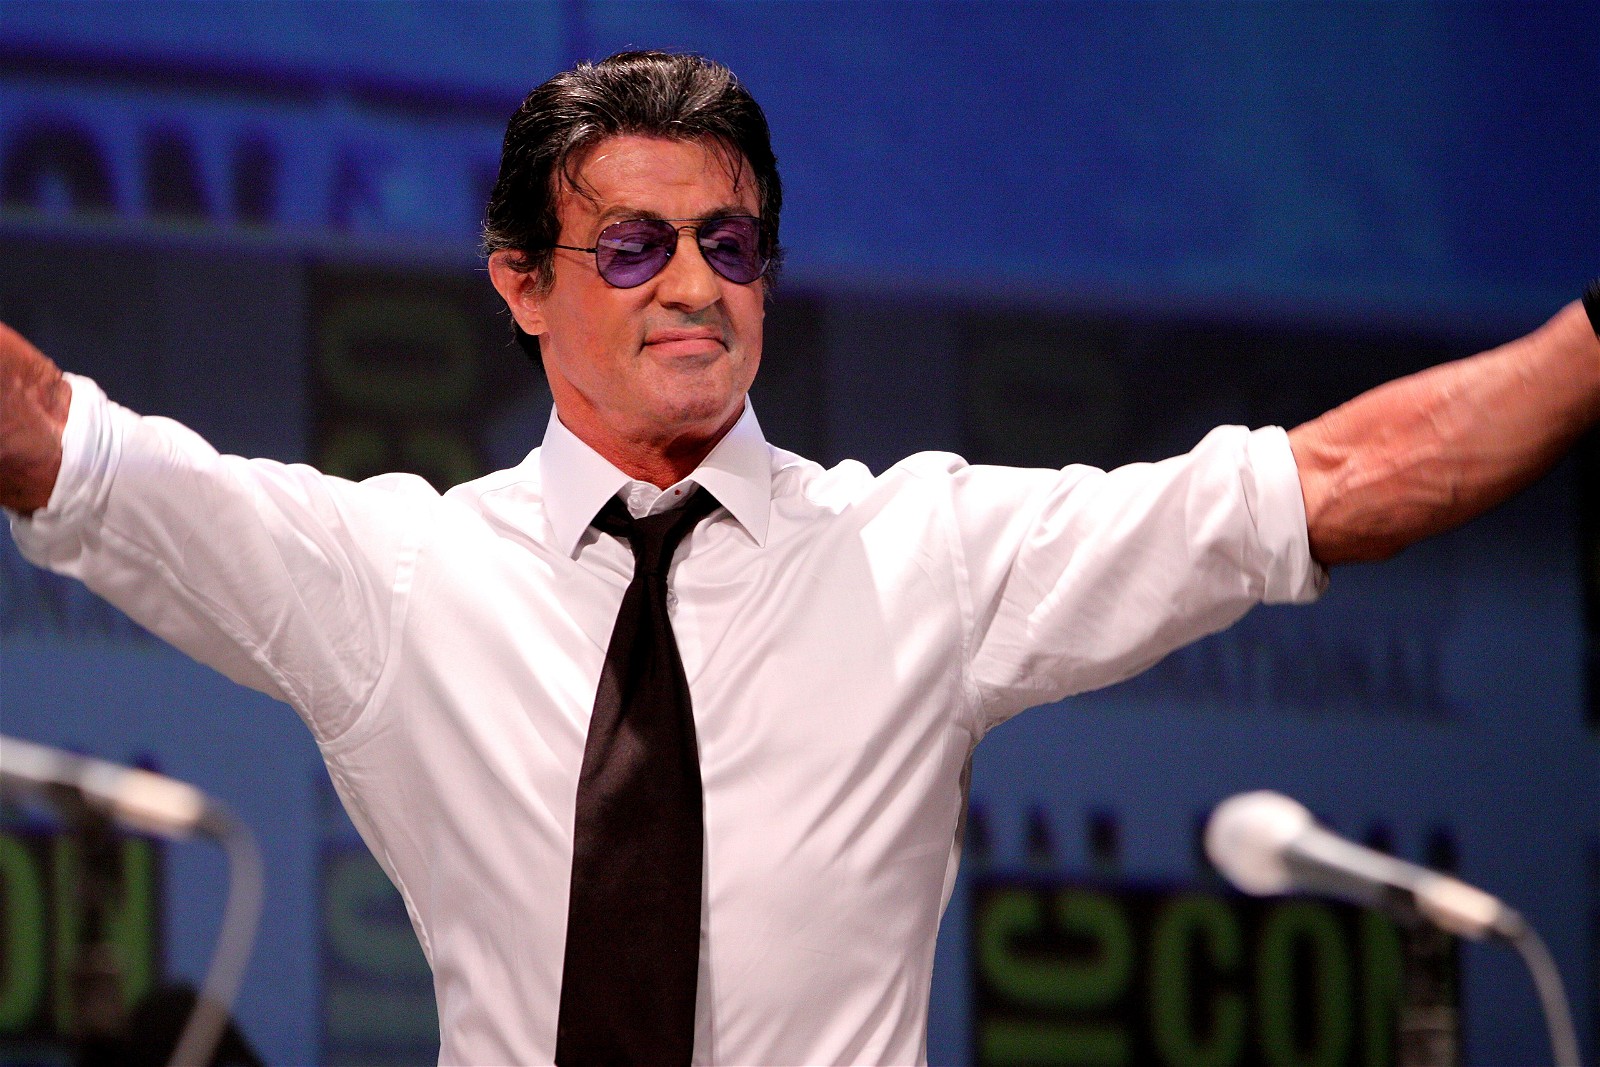 Sylvester Stallone with outstretched arms on the Expendables panel at the 2010 San Diego Comic Con